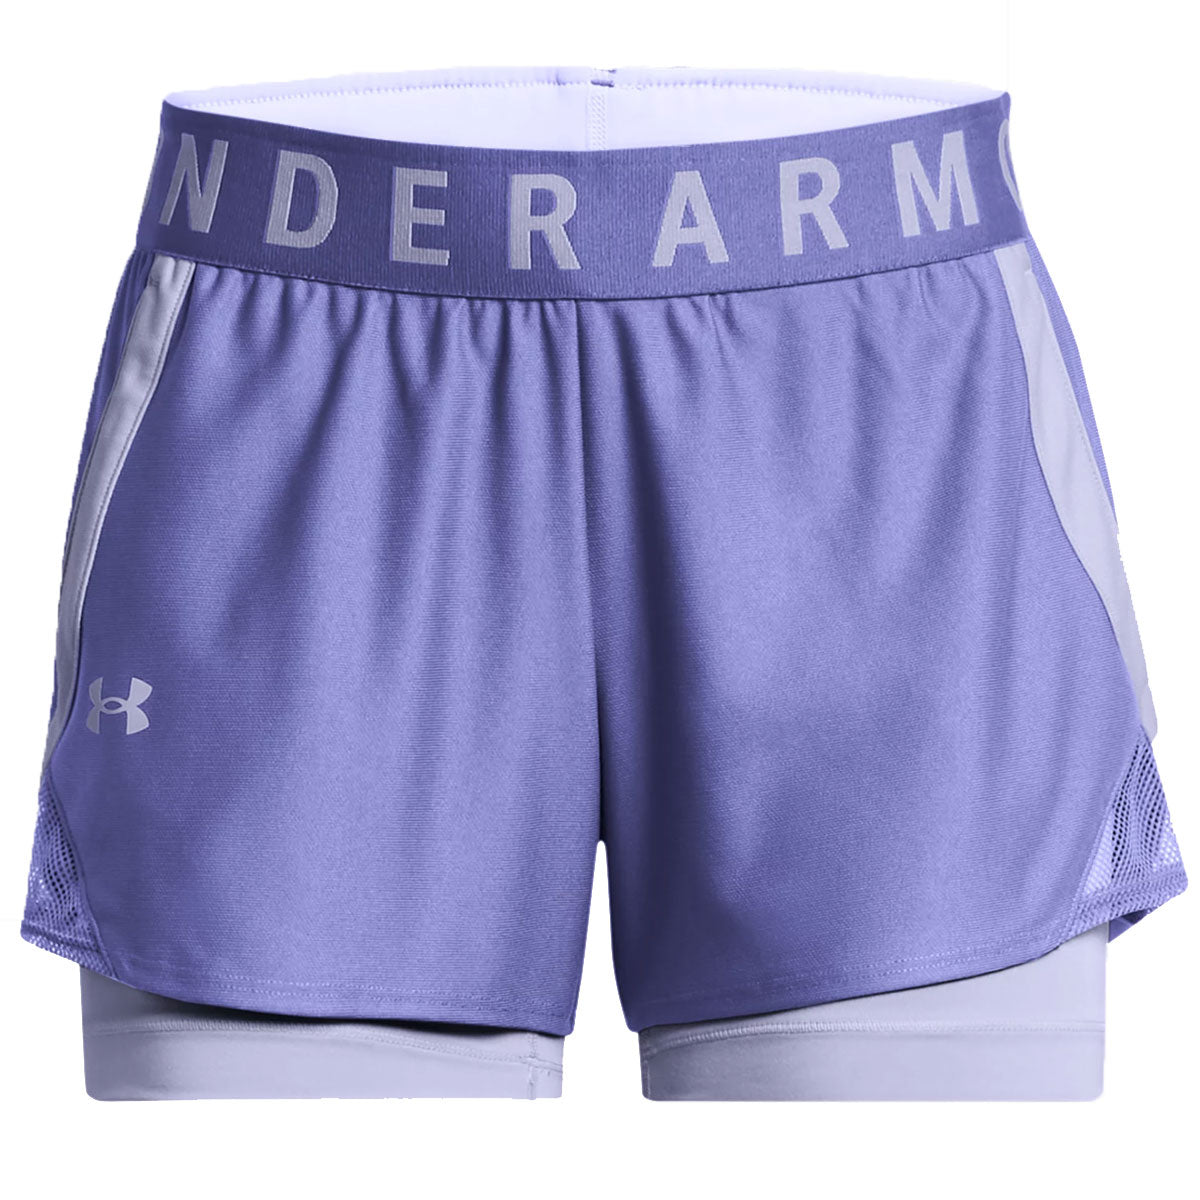 Under Armour Play Up 2 in 1 Shorts - Womens - Starlight/Celeste